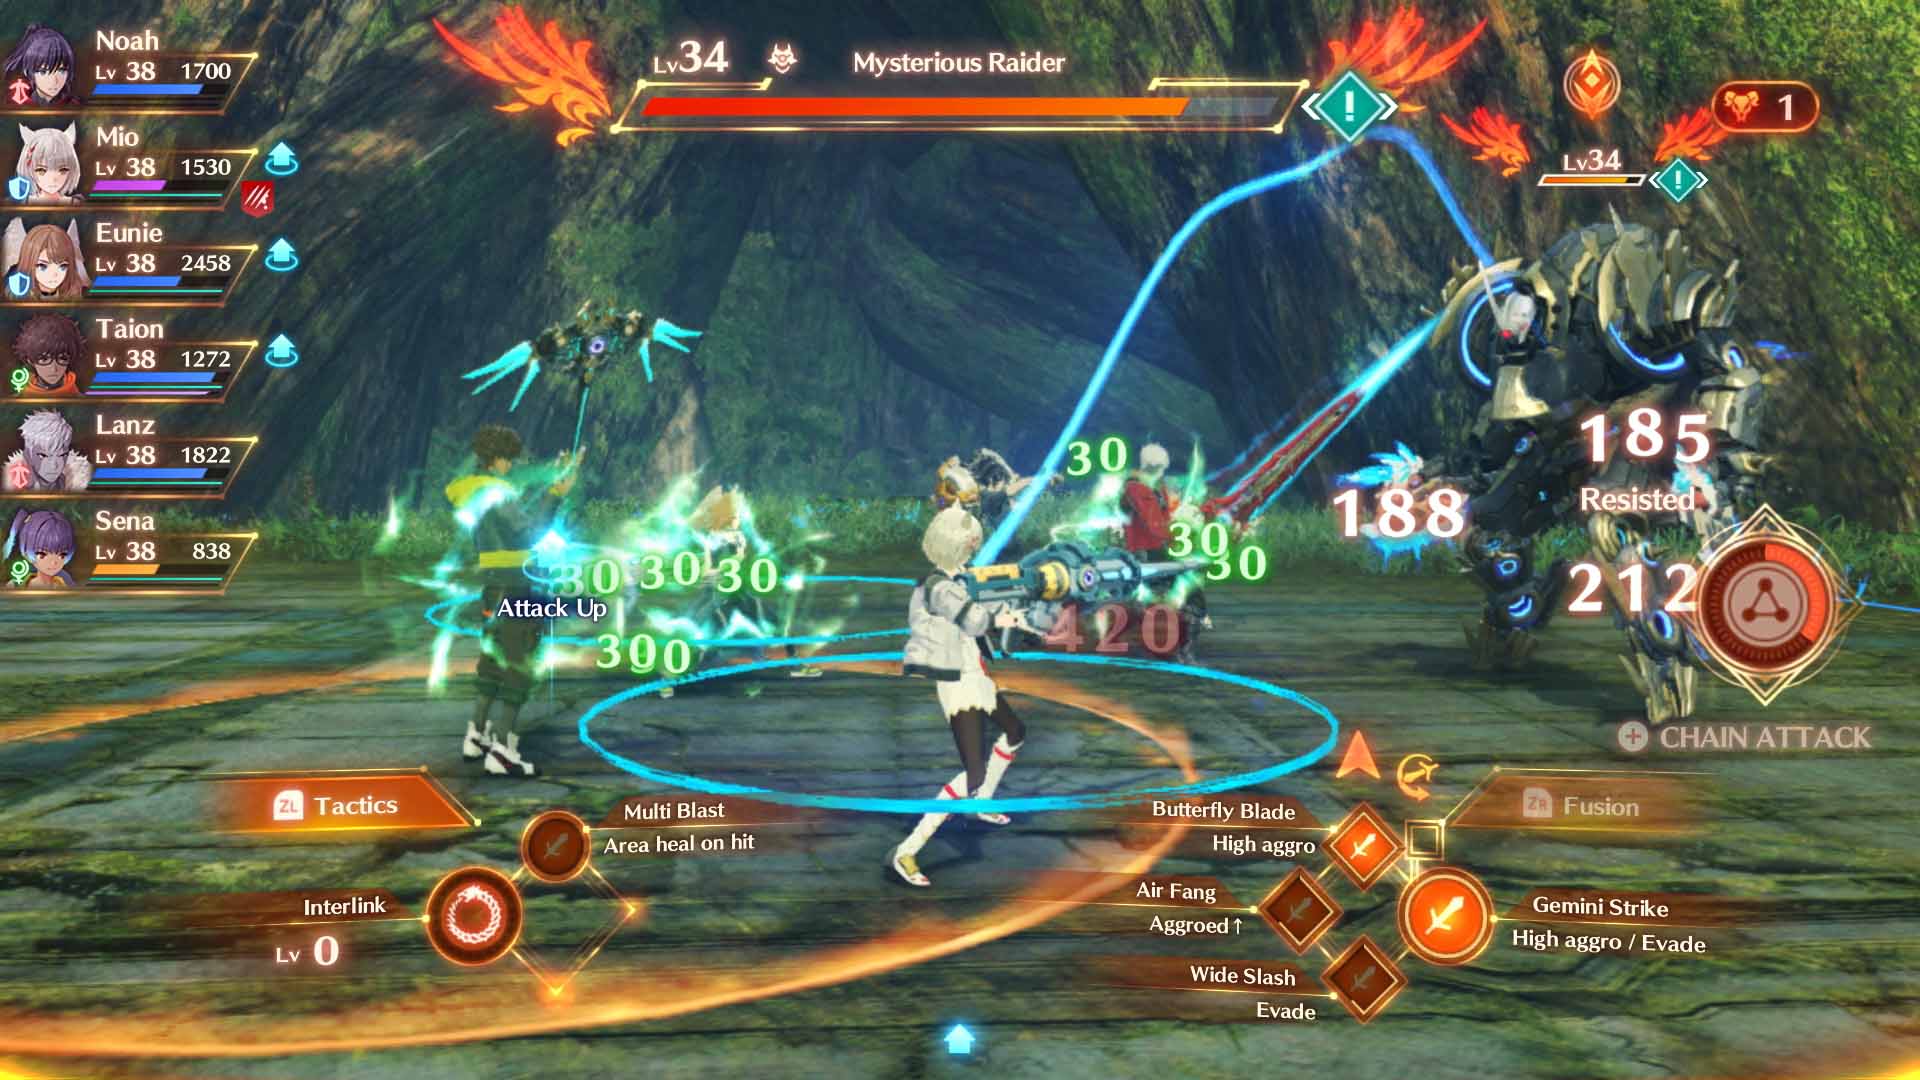 Xenoblade Chronicles 3 is complex, gargantuan, and brilliant | Hands-on preview